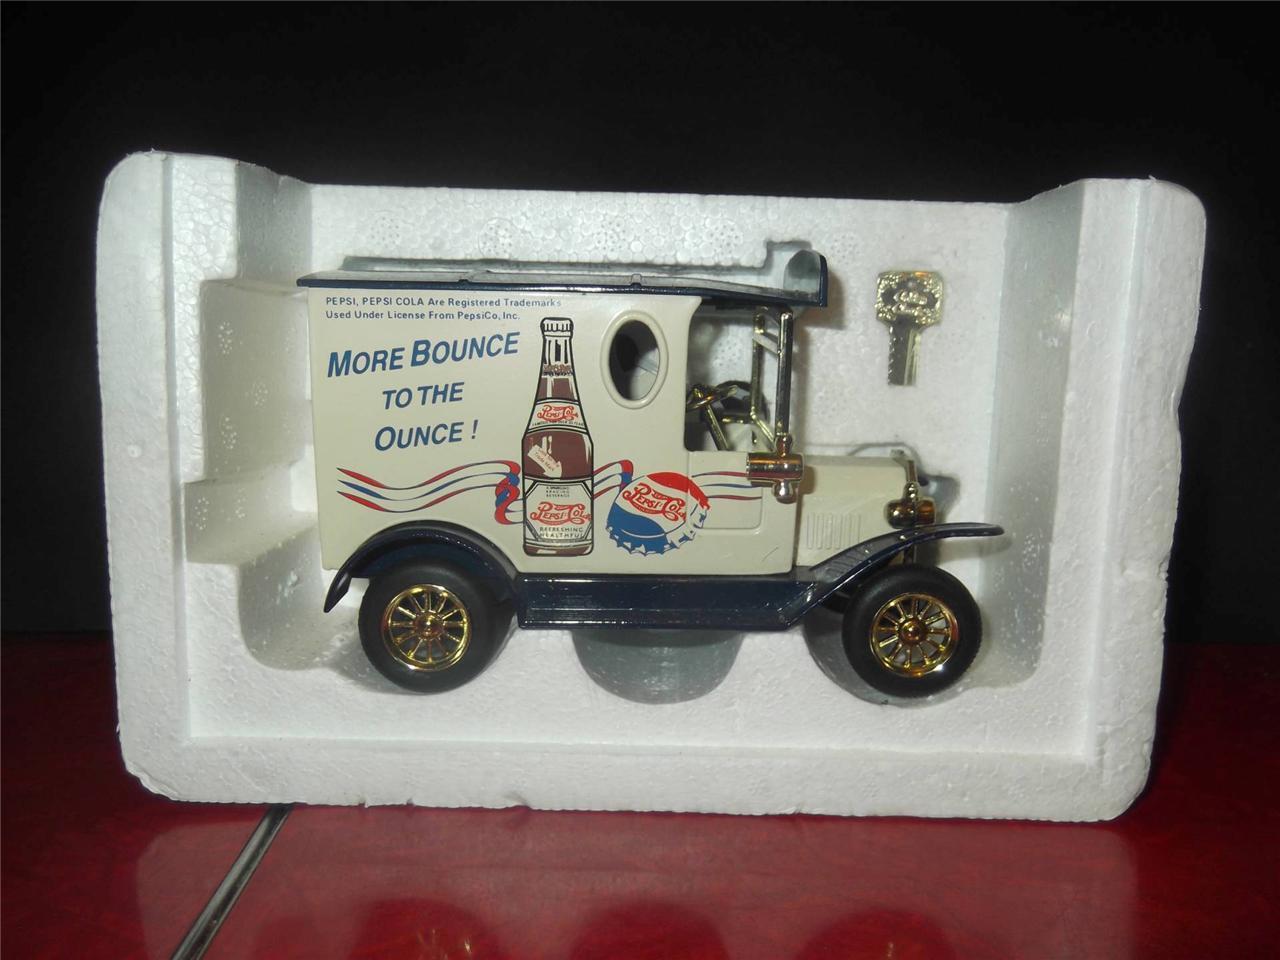 SPECIAL EDITION DIE CAST METAL PEPSI COLA GOLDEN CLASSIC BANK  SAVINGS PENNY Без бренда